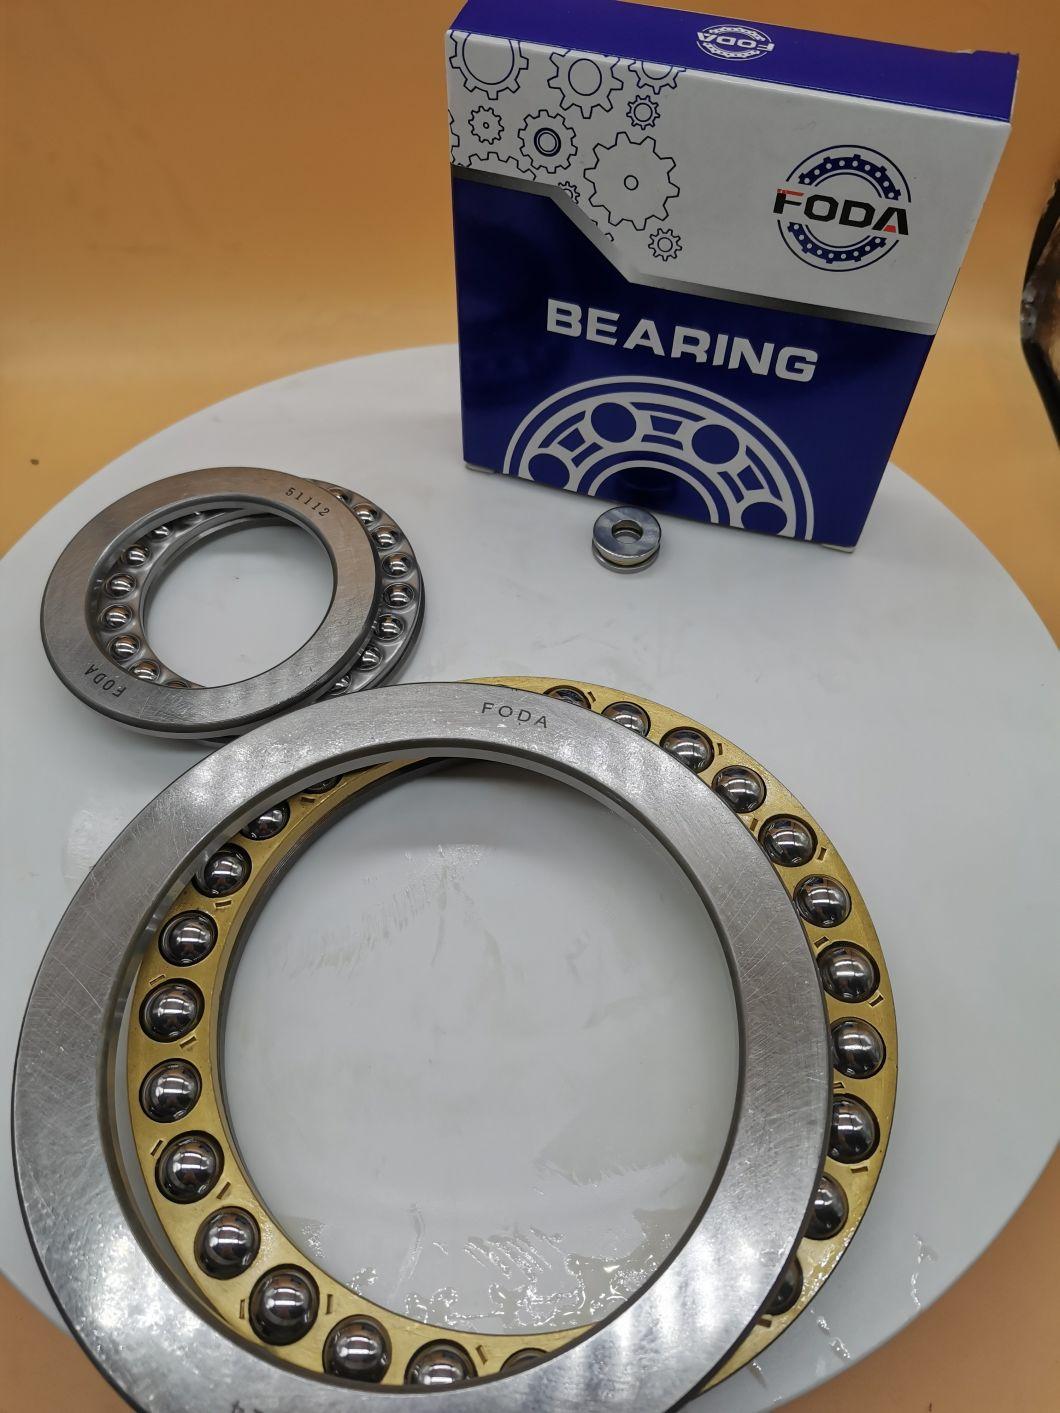 High Quality Like /Low Speed Reducer/Thrust Ball Bearings for Crane Hooks/Rolling Bearings/Thrust Ball Bearings for Jacks/ Thrust Ball Bearings of 51232